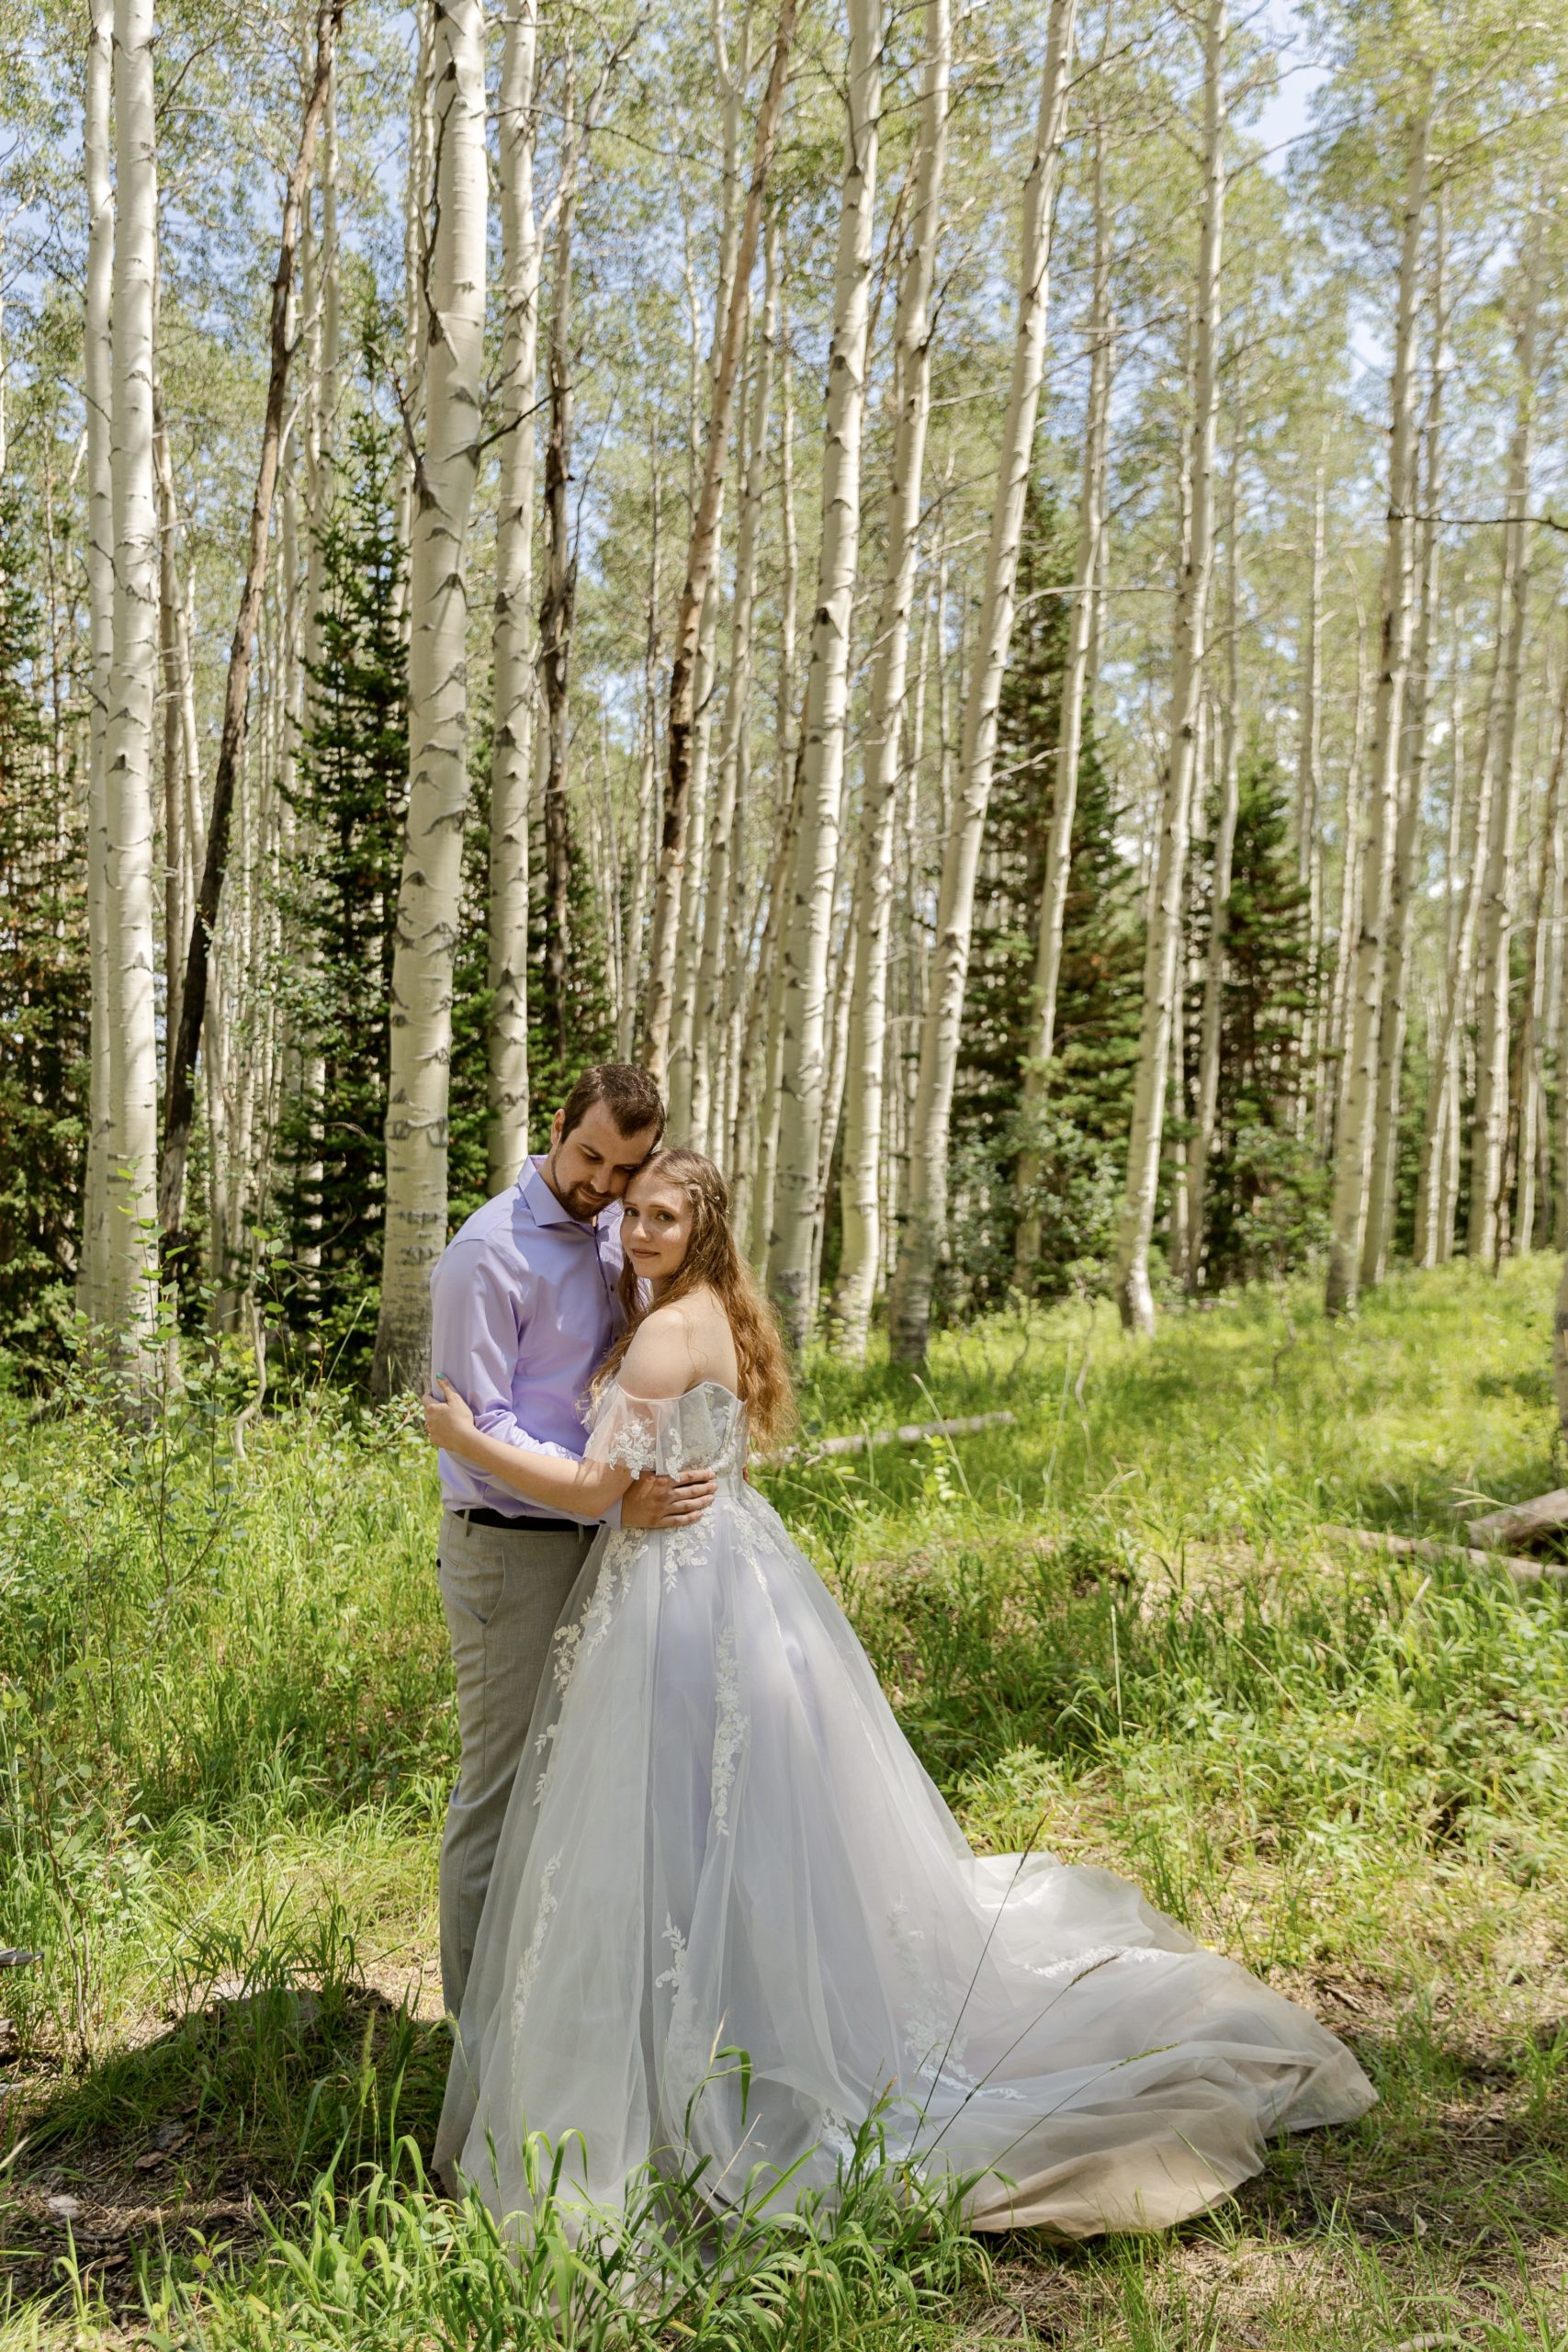 Bride and groom embracing each other in a forest of green aspen trees in the summer